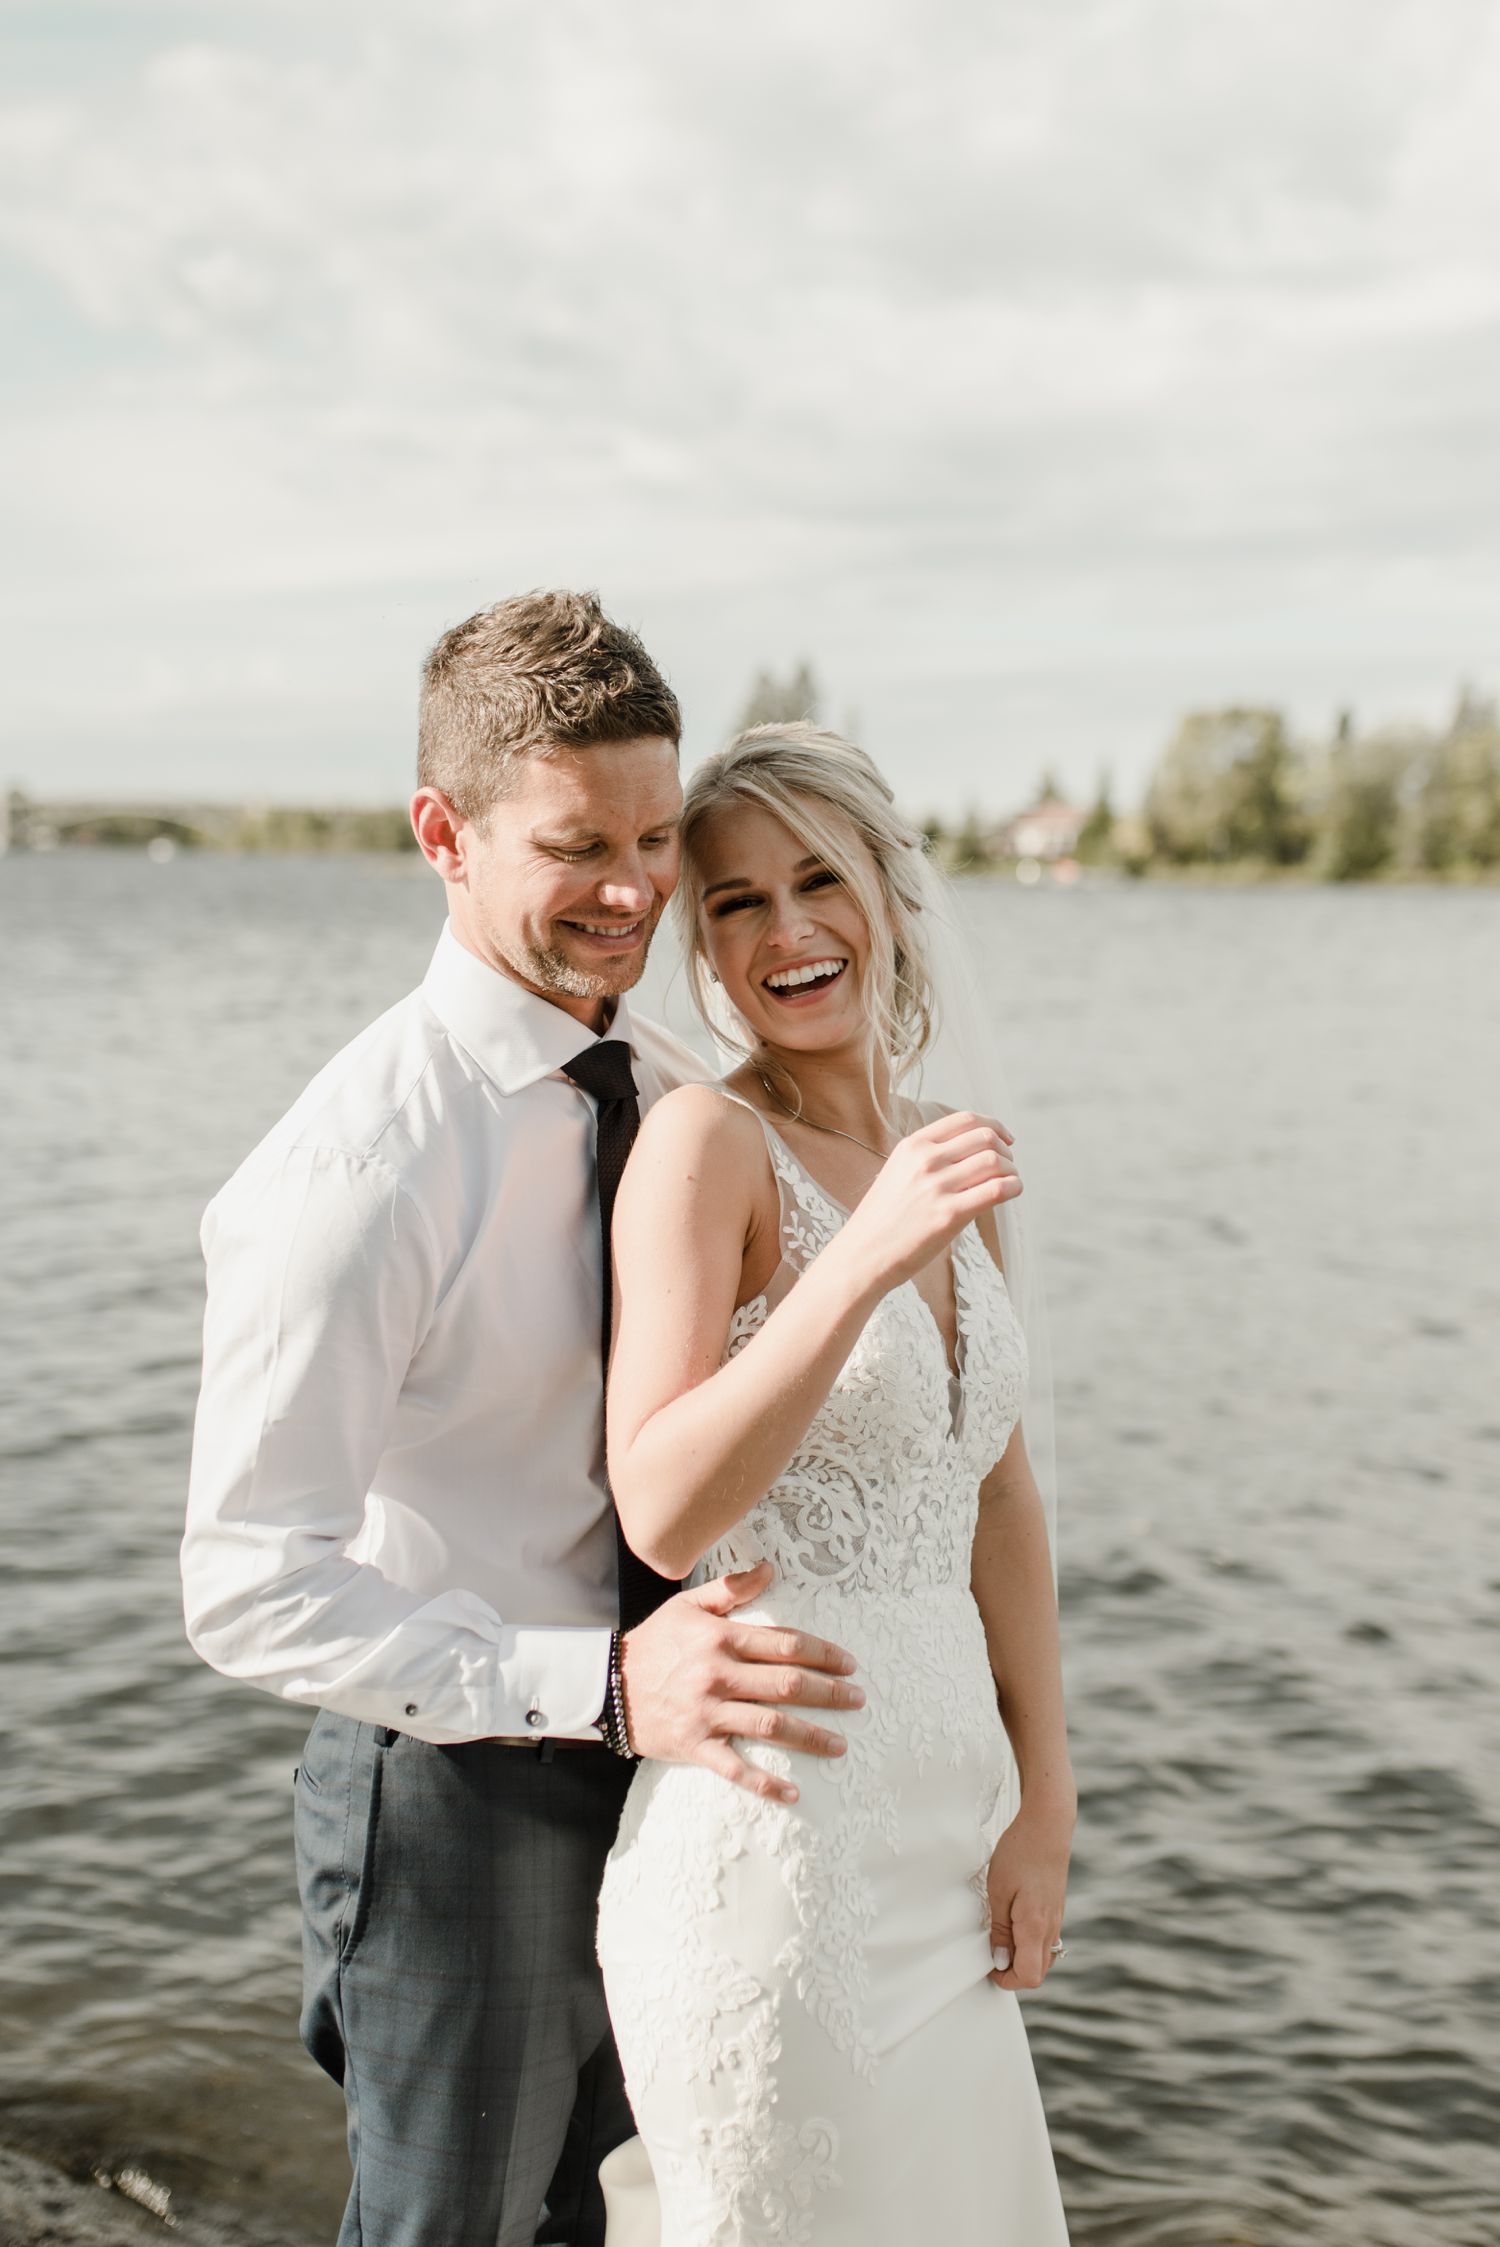 Lakeside Kenora wedding, fall wedding in Ontario, photographed by Vanessa Renae Photography, a Winnipeg and Kenora wedding photographer